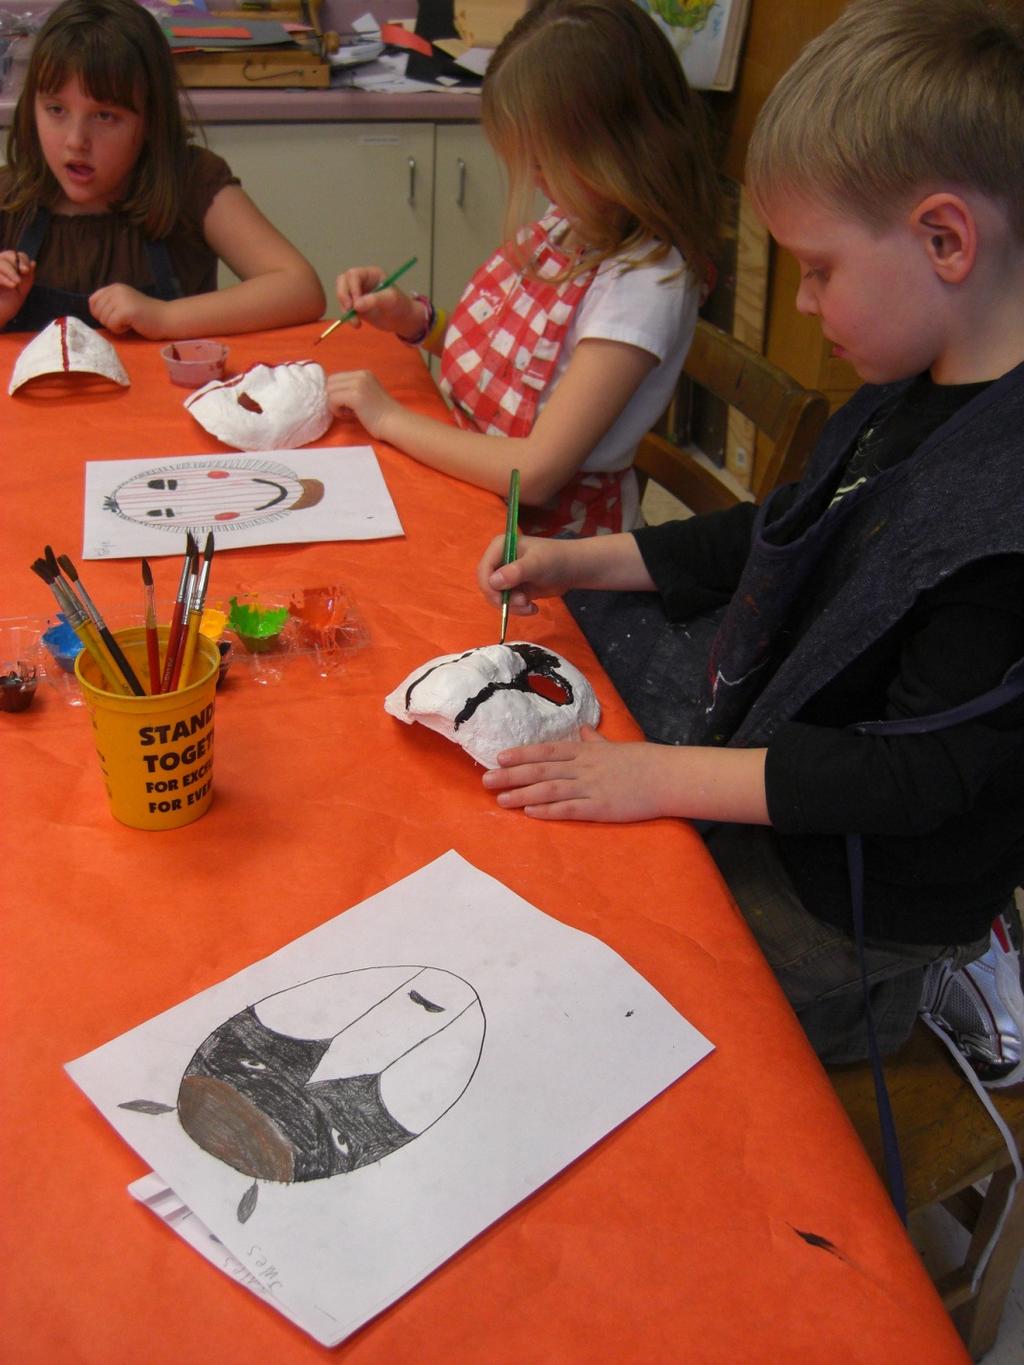 We painted our masks.